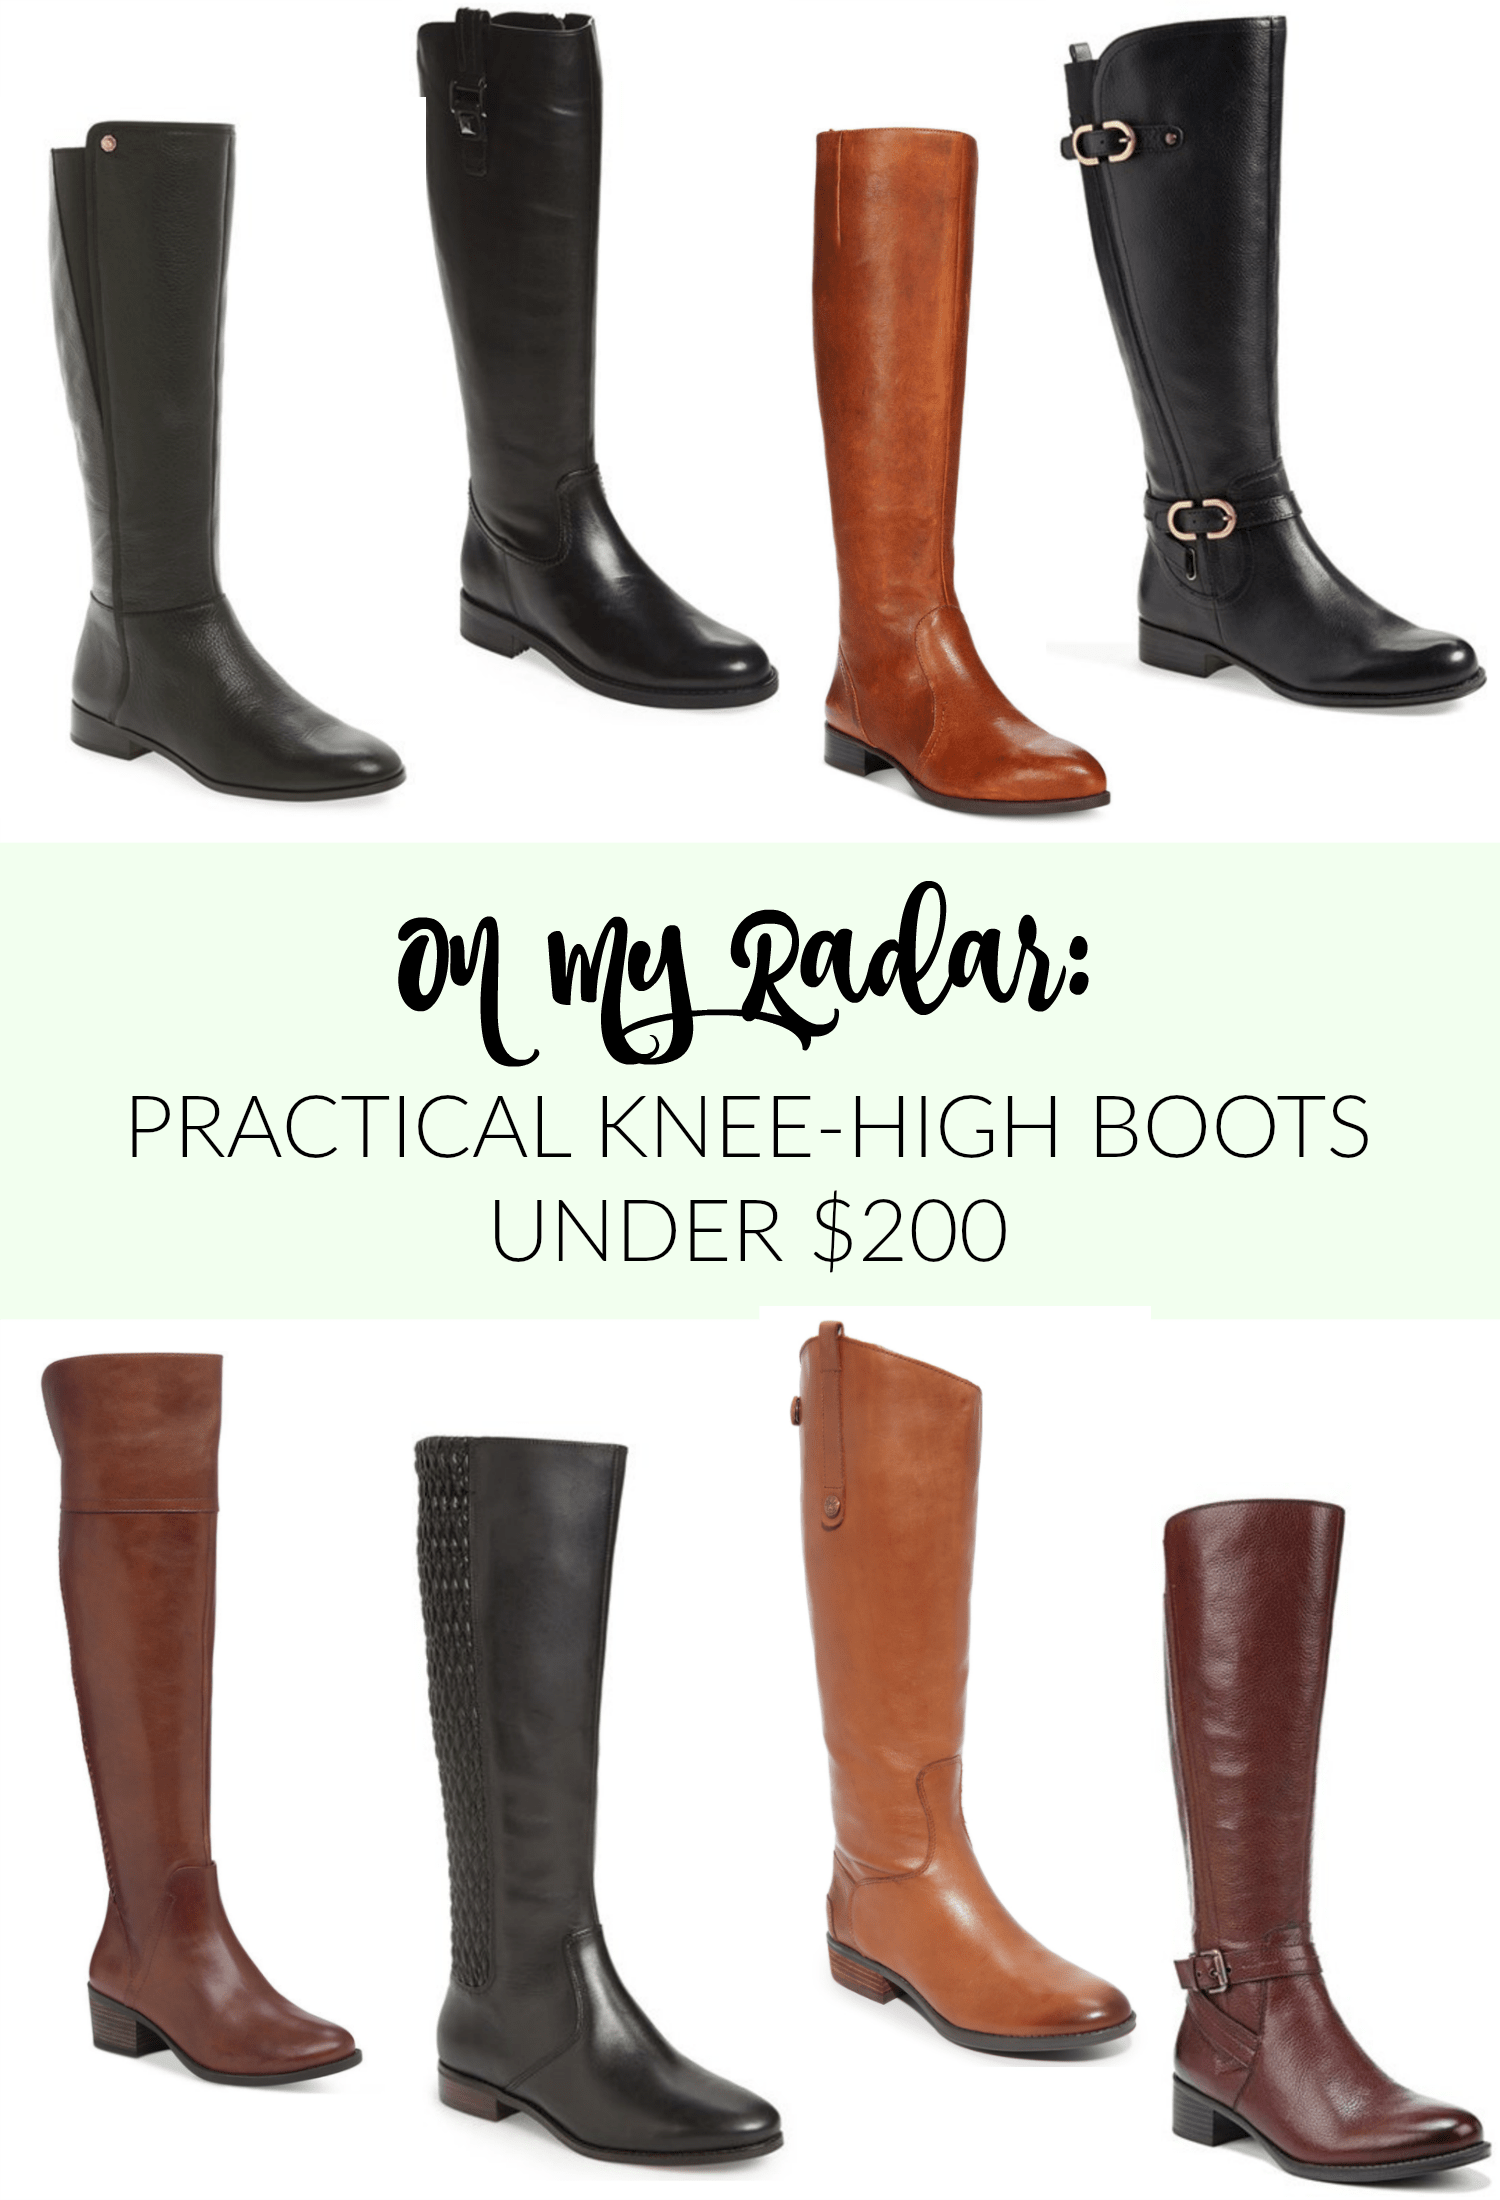 Practical Knee-High Boots Under $200